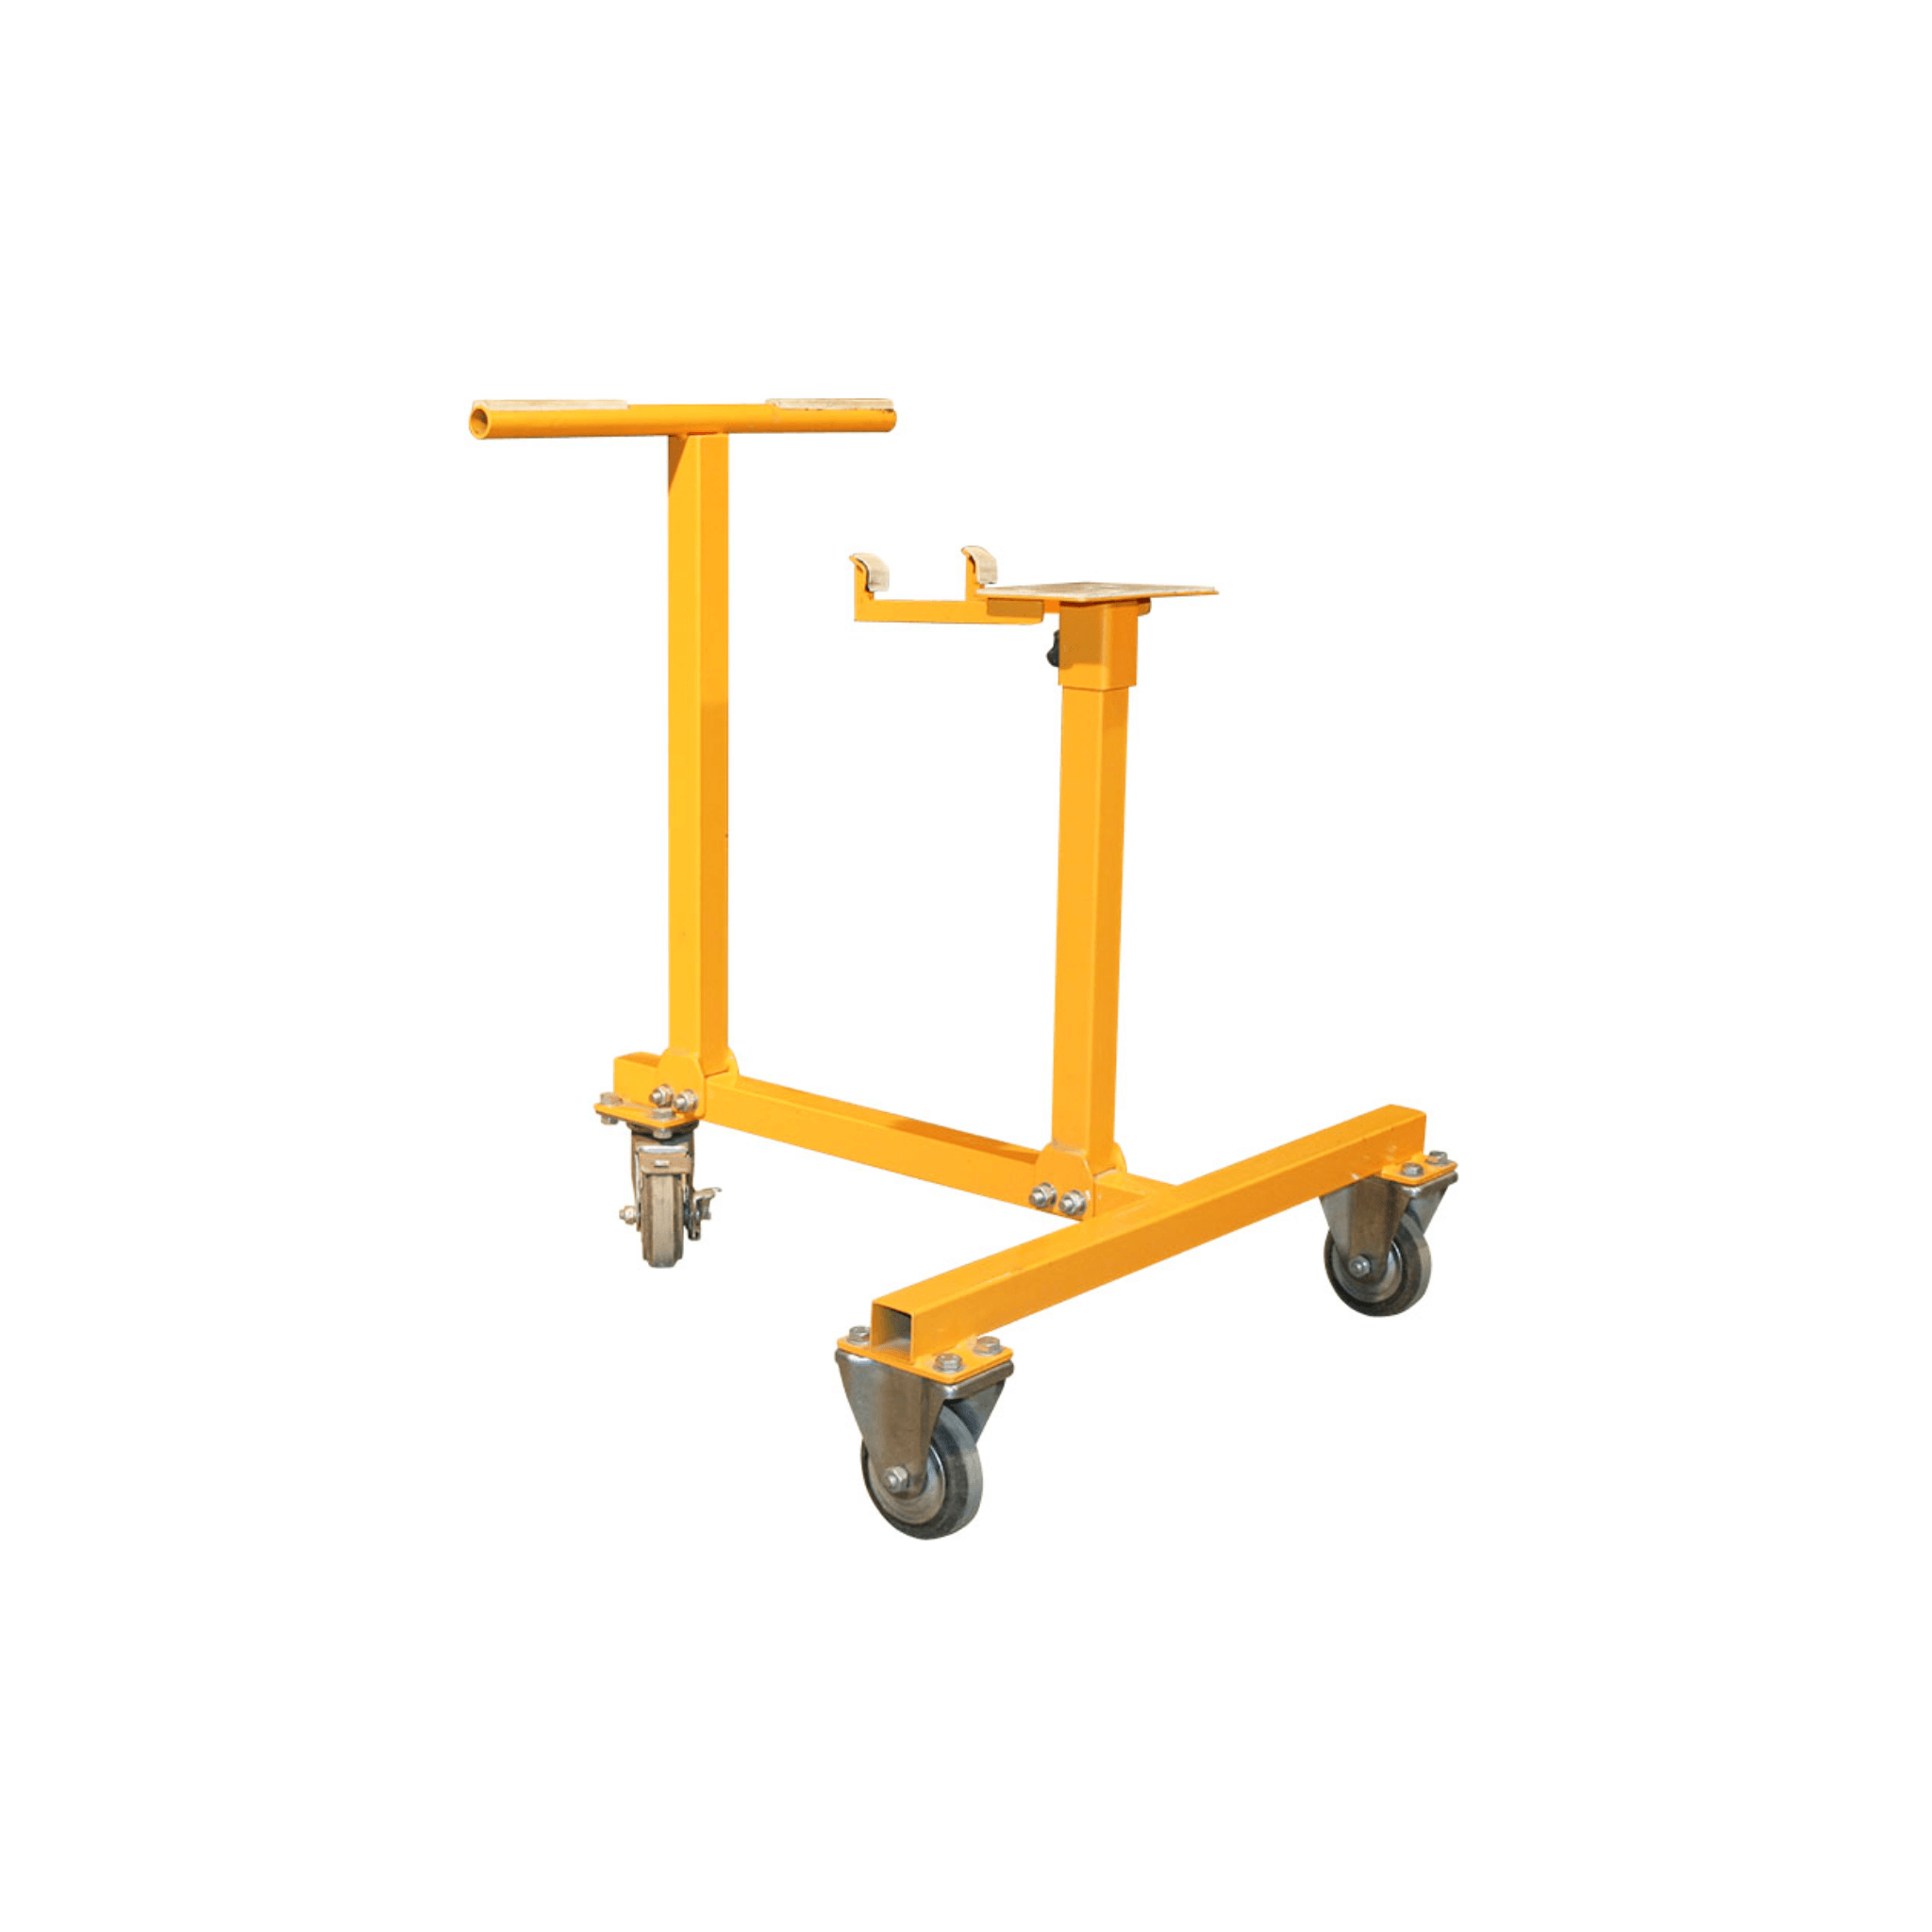 Aardwolf Vacuum Lifter Parking Station - Direct Stone Tool Supply, Inc